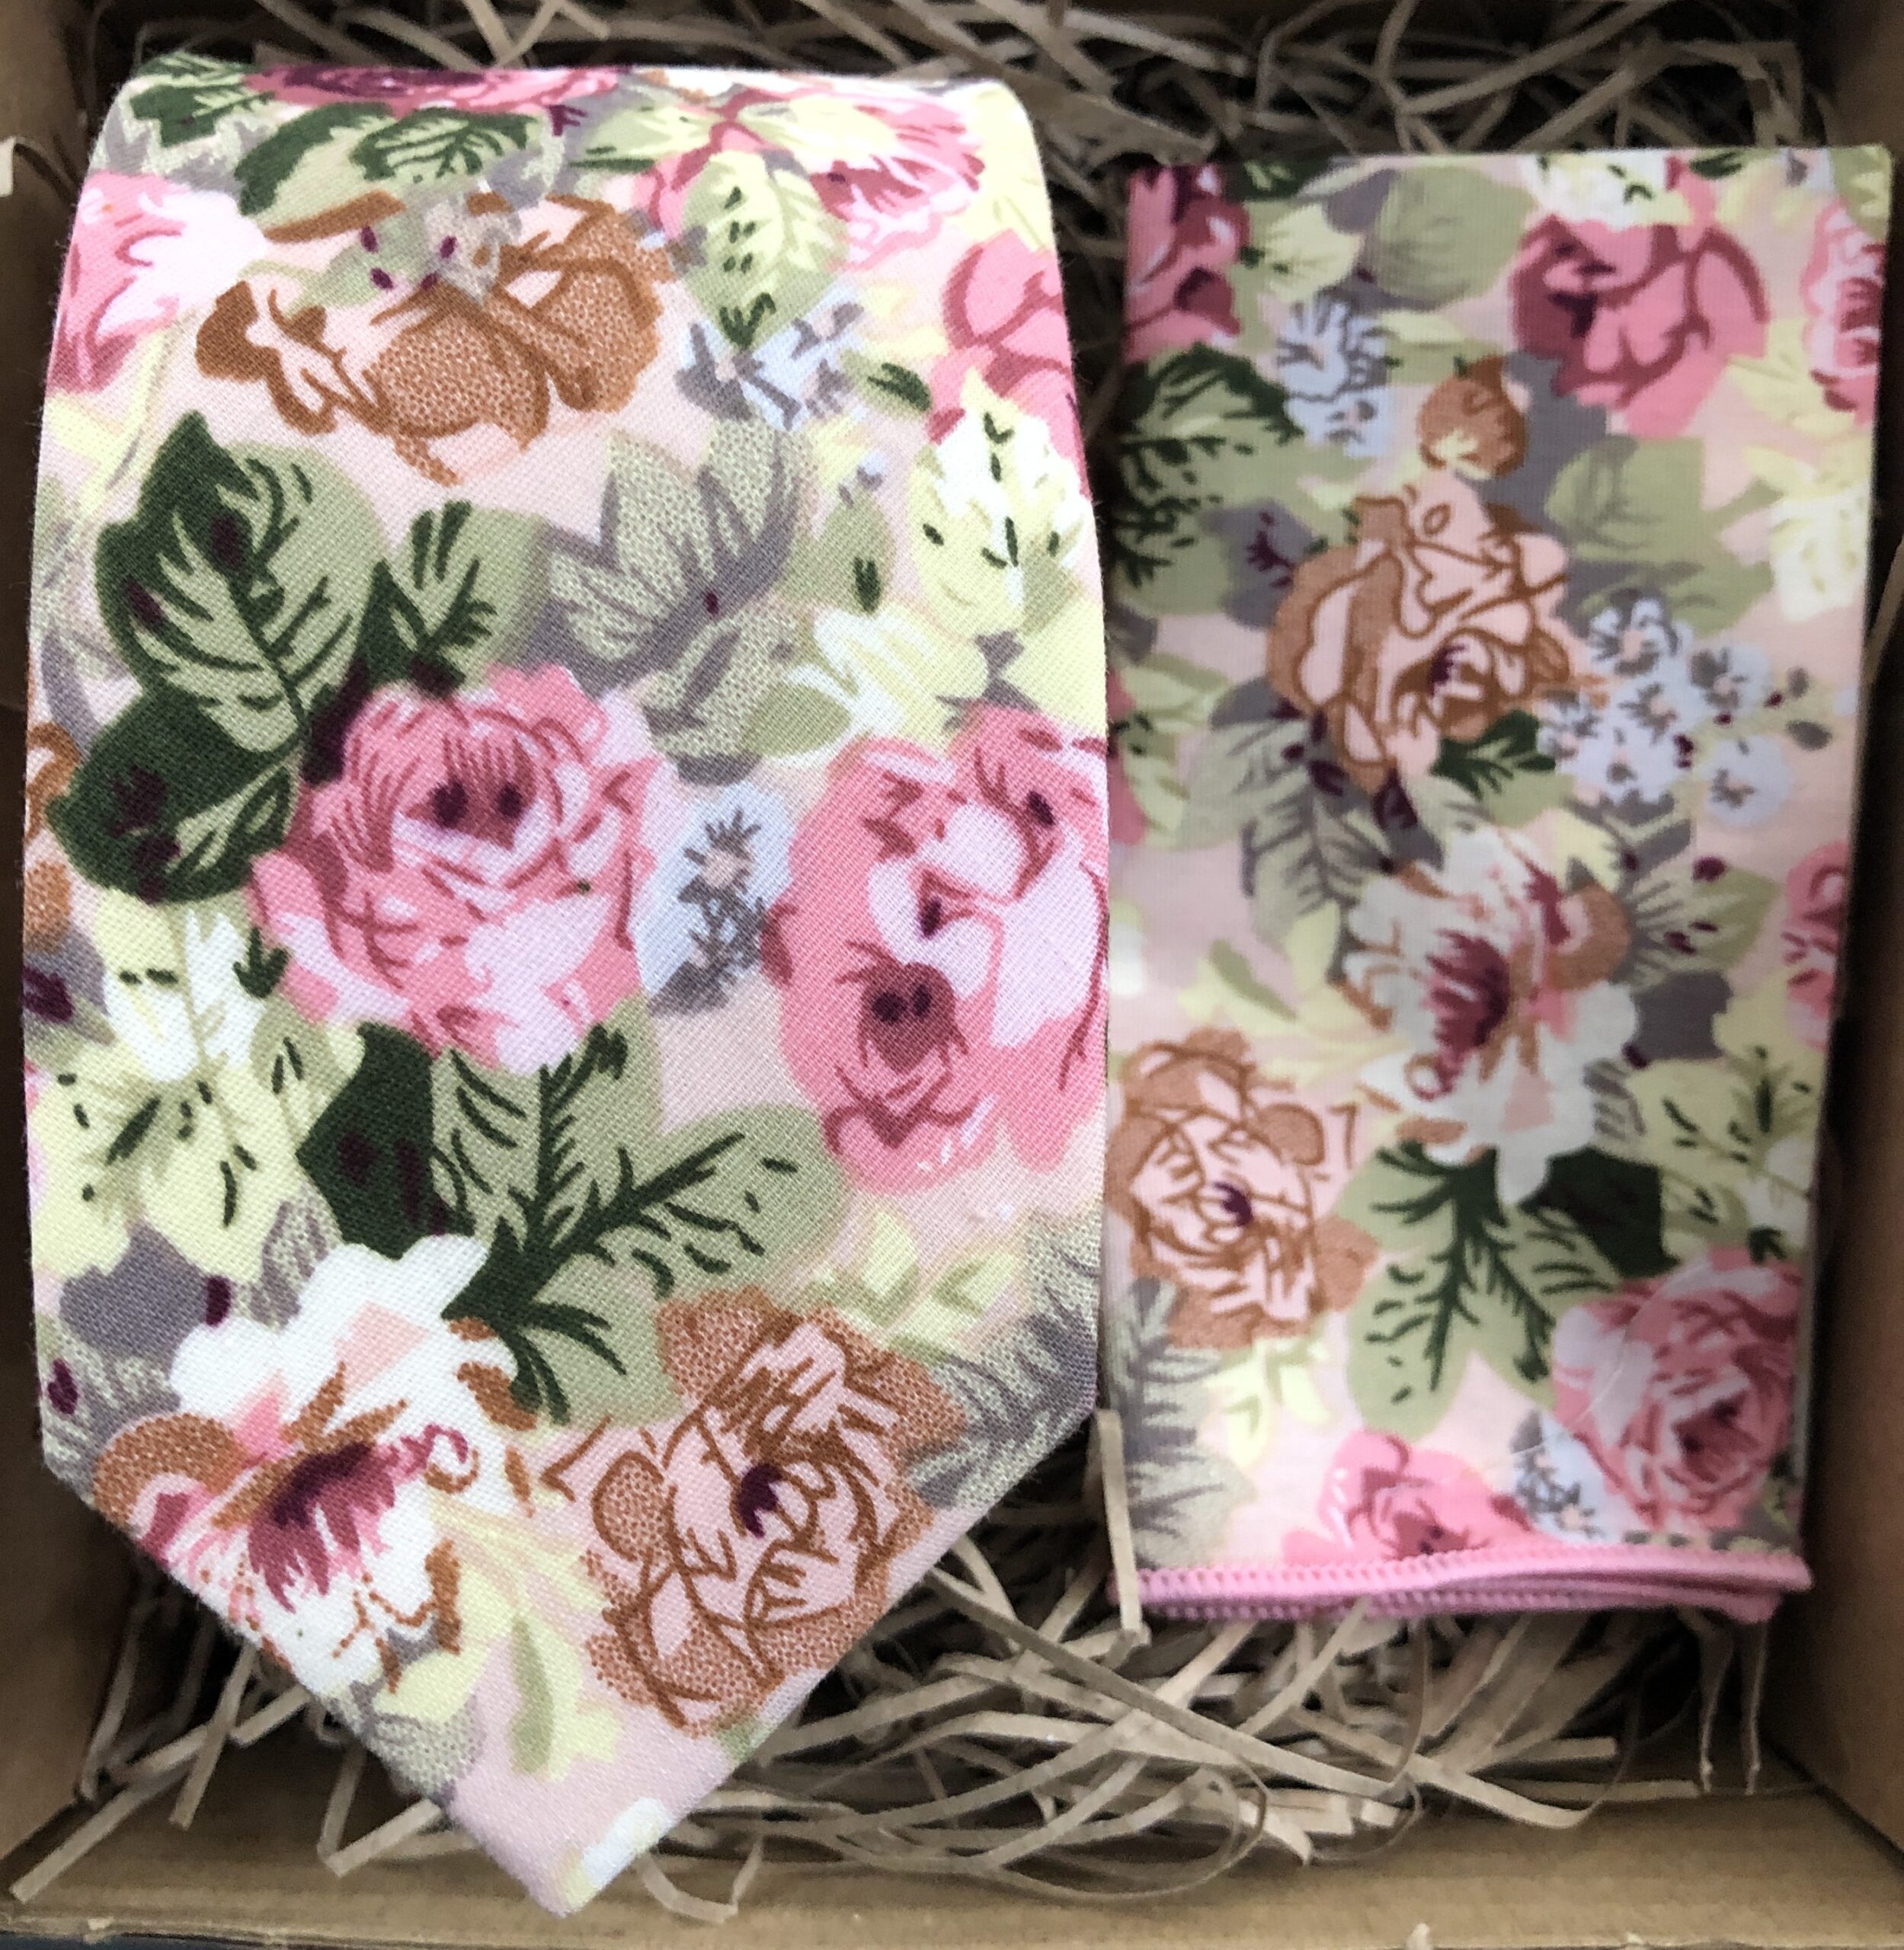 A photo of a pink floral cotton tie and pocket square